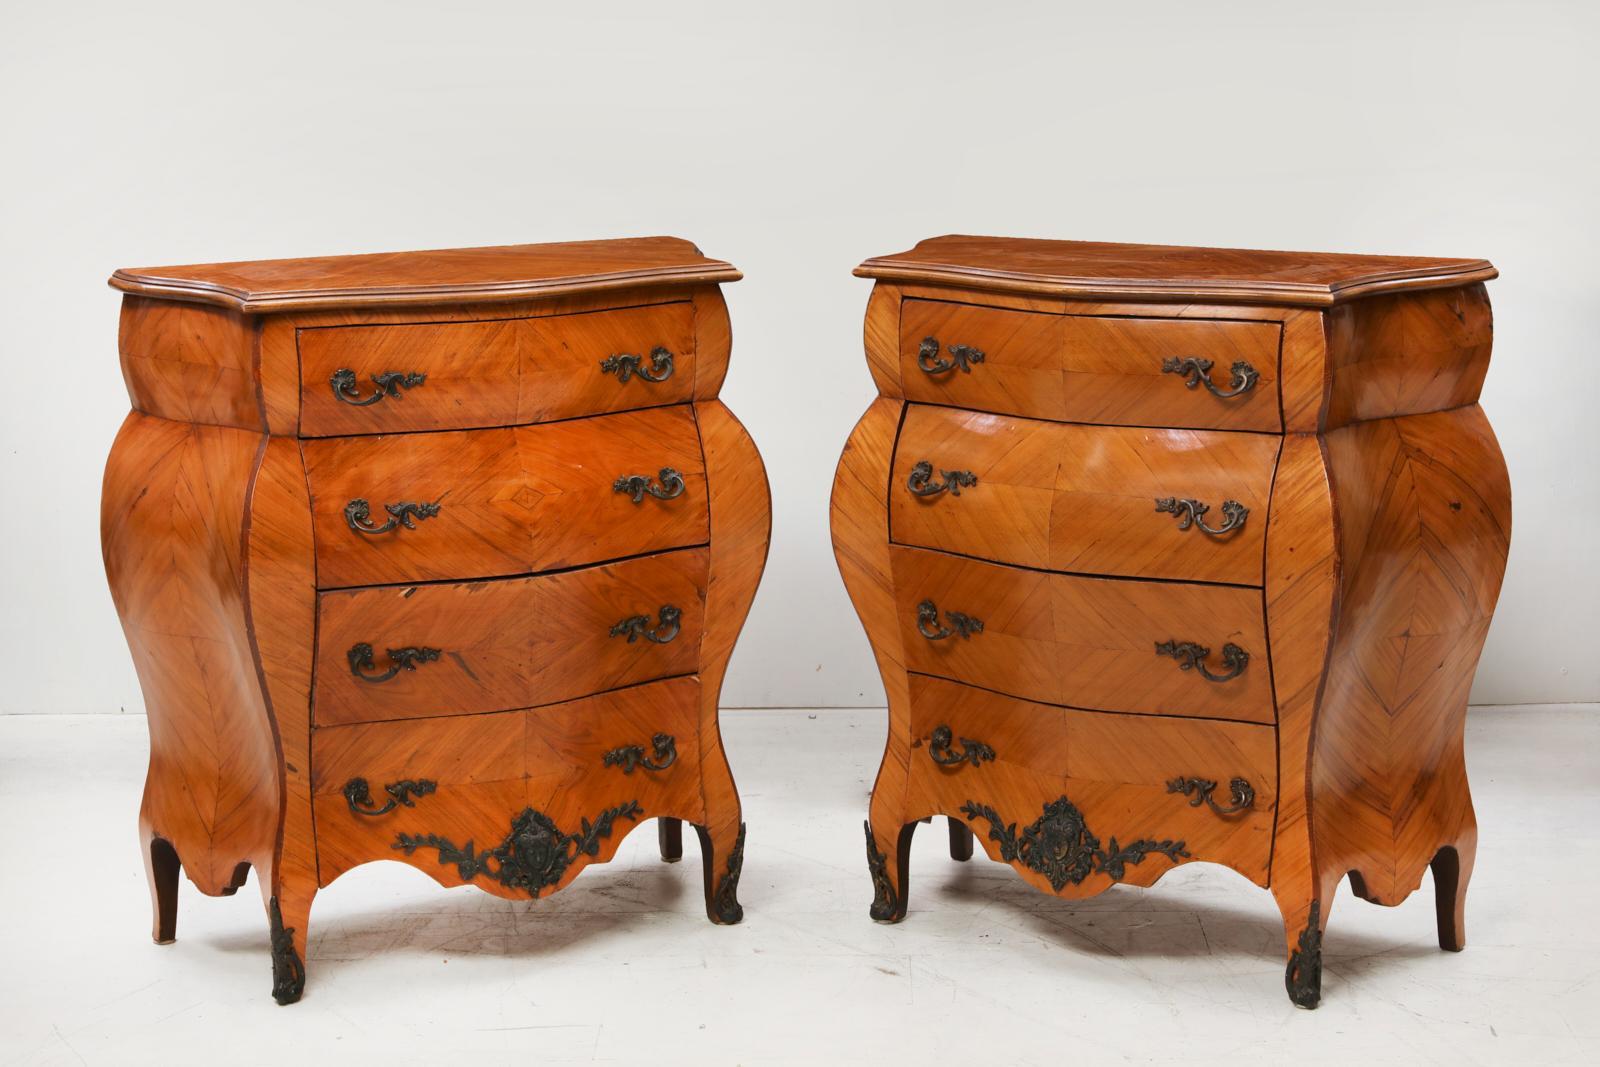 Gilt Pair of Italian Rococo Style Night Stands